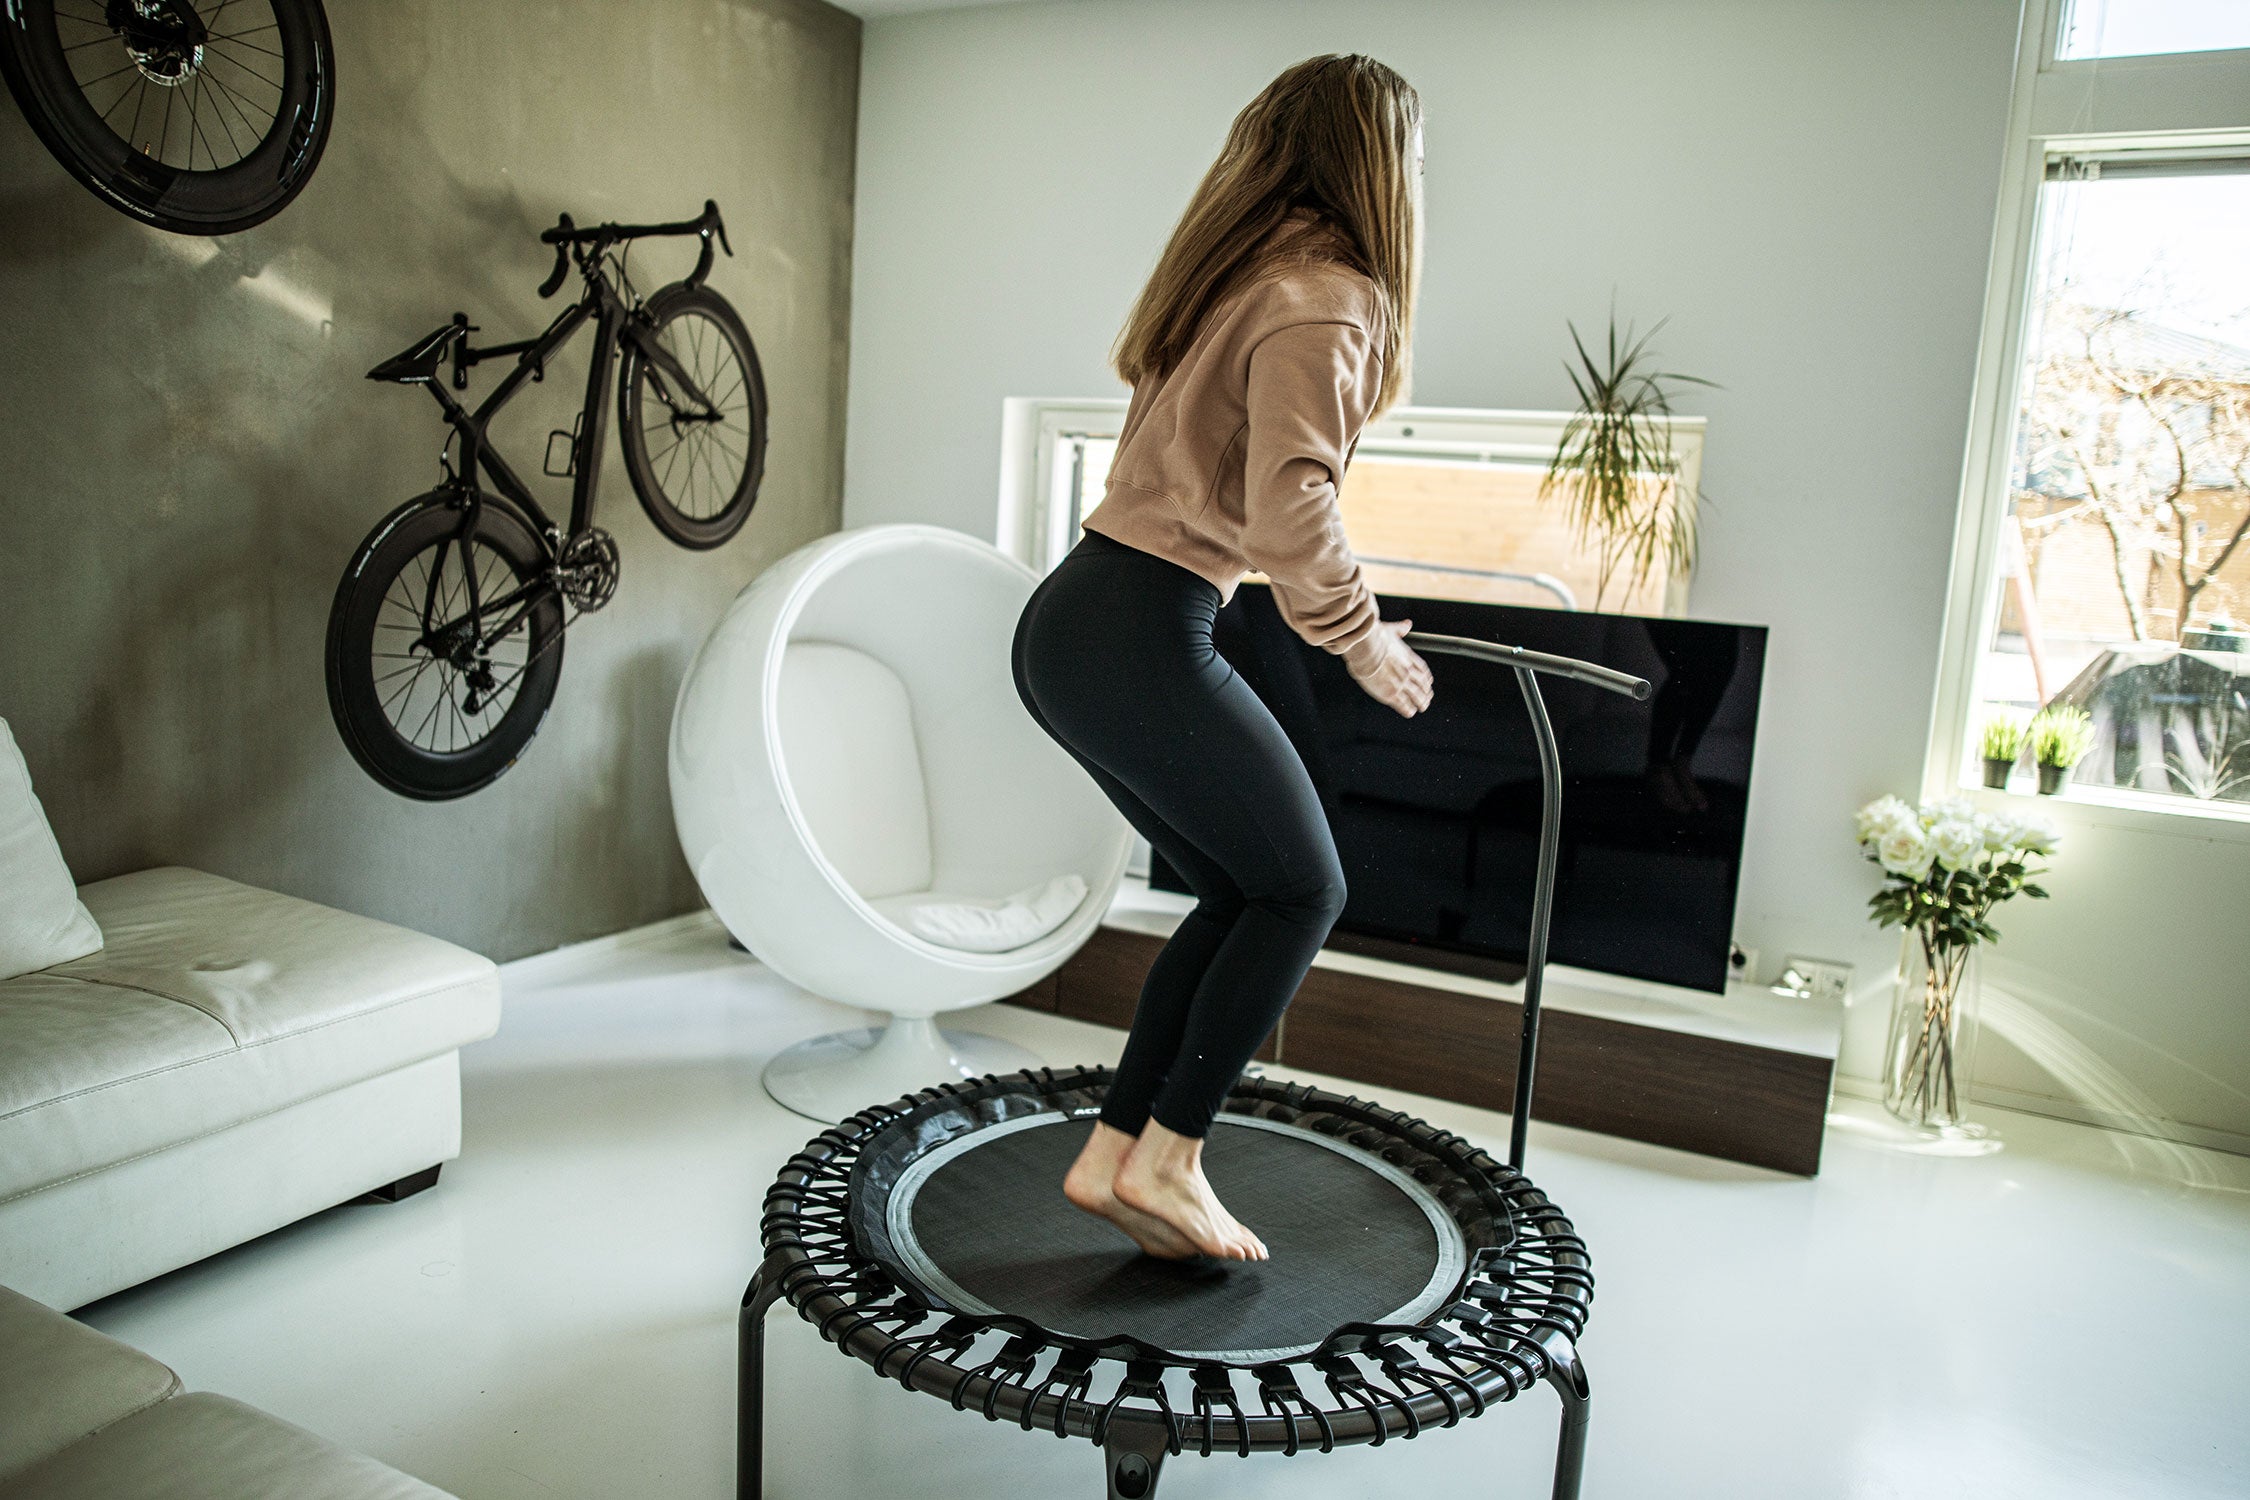 A woman doing ski jumps on a black and round rebounder trampoline at her home in her living room